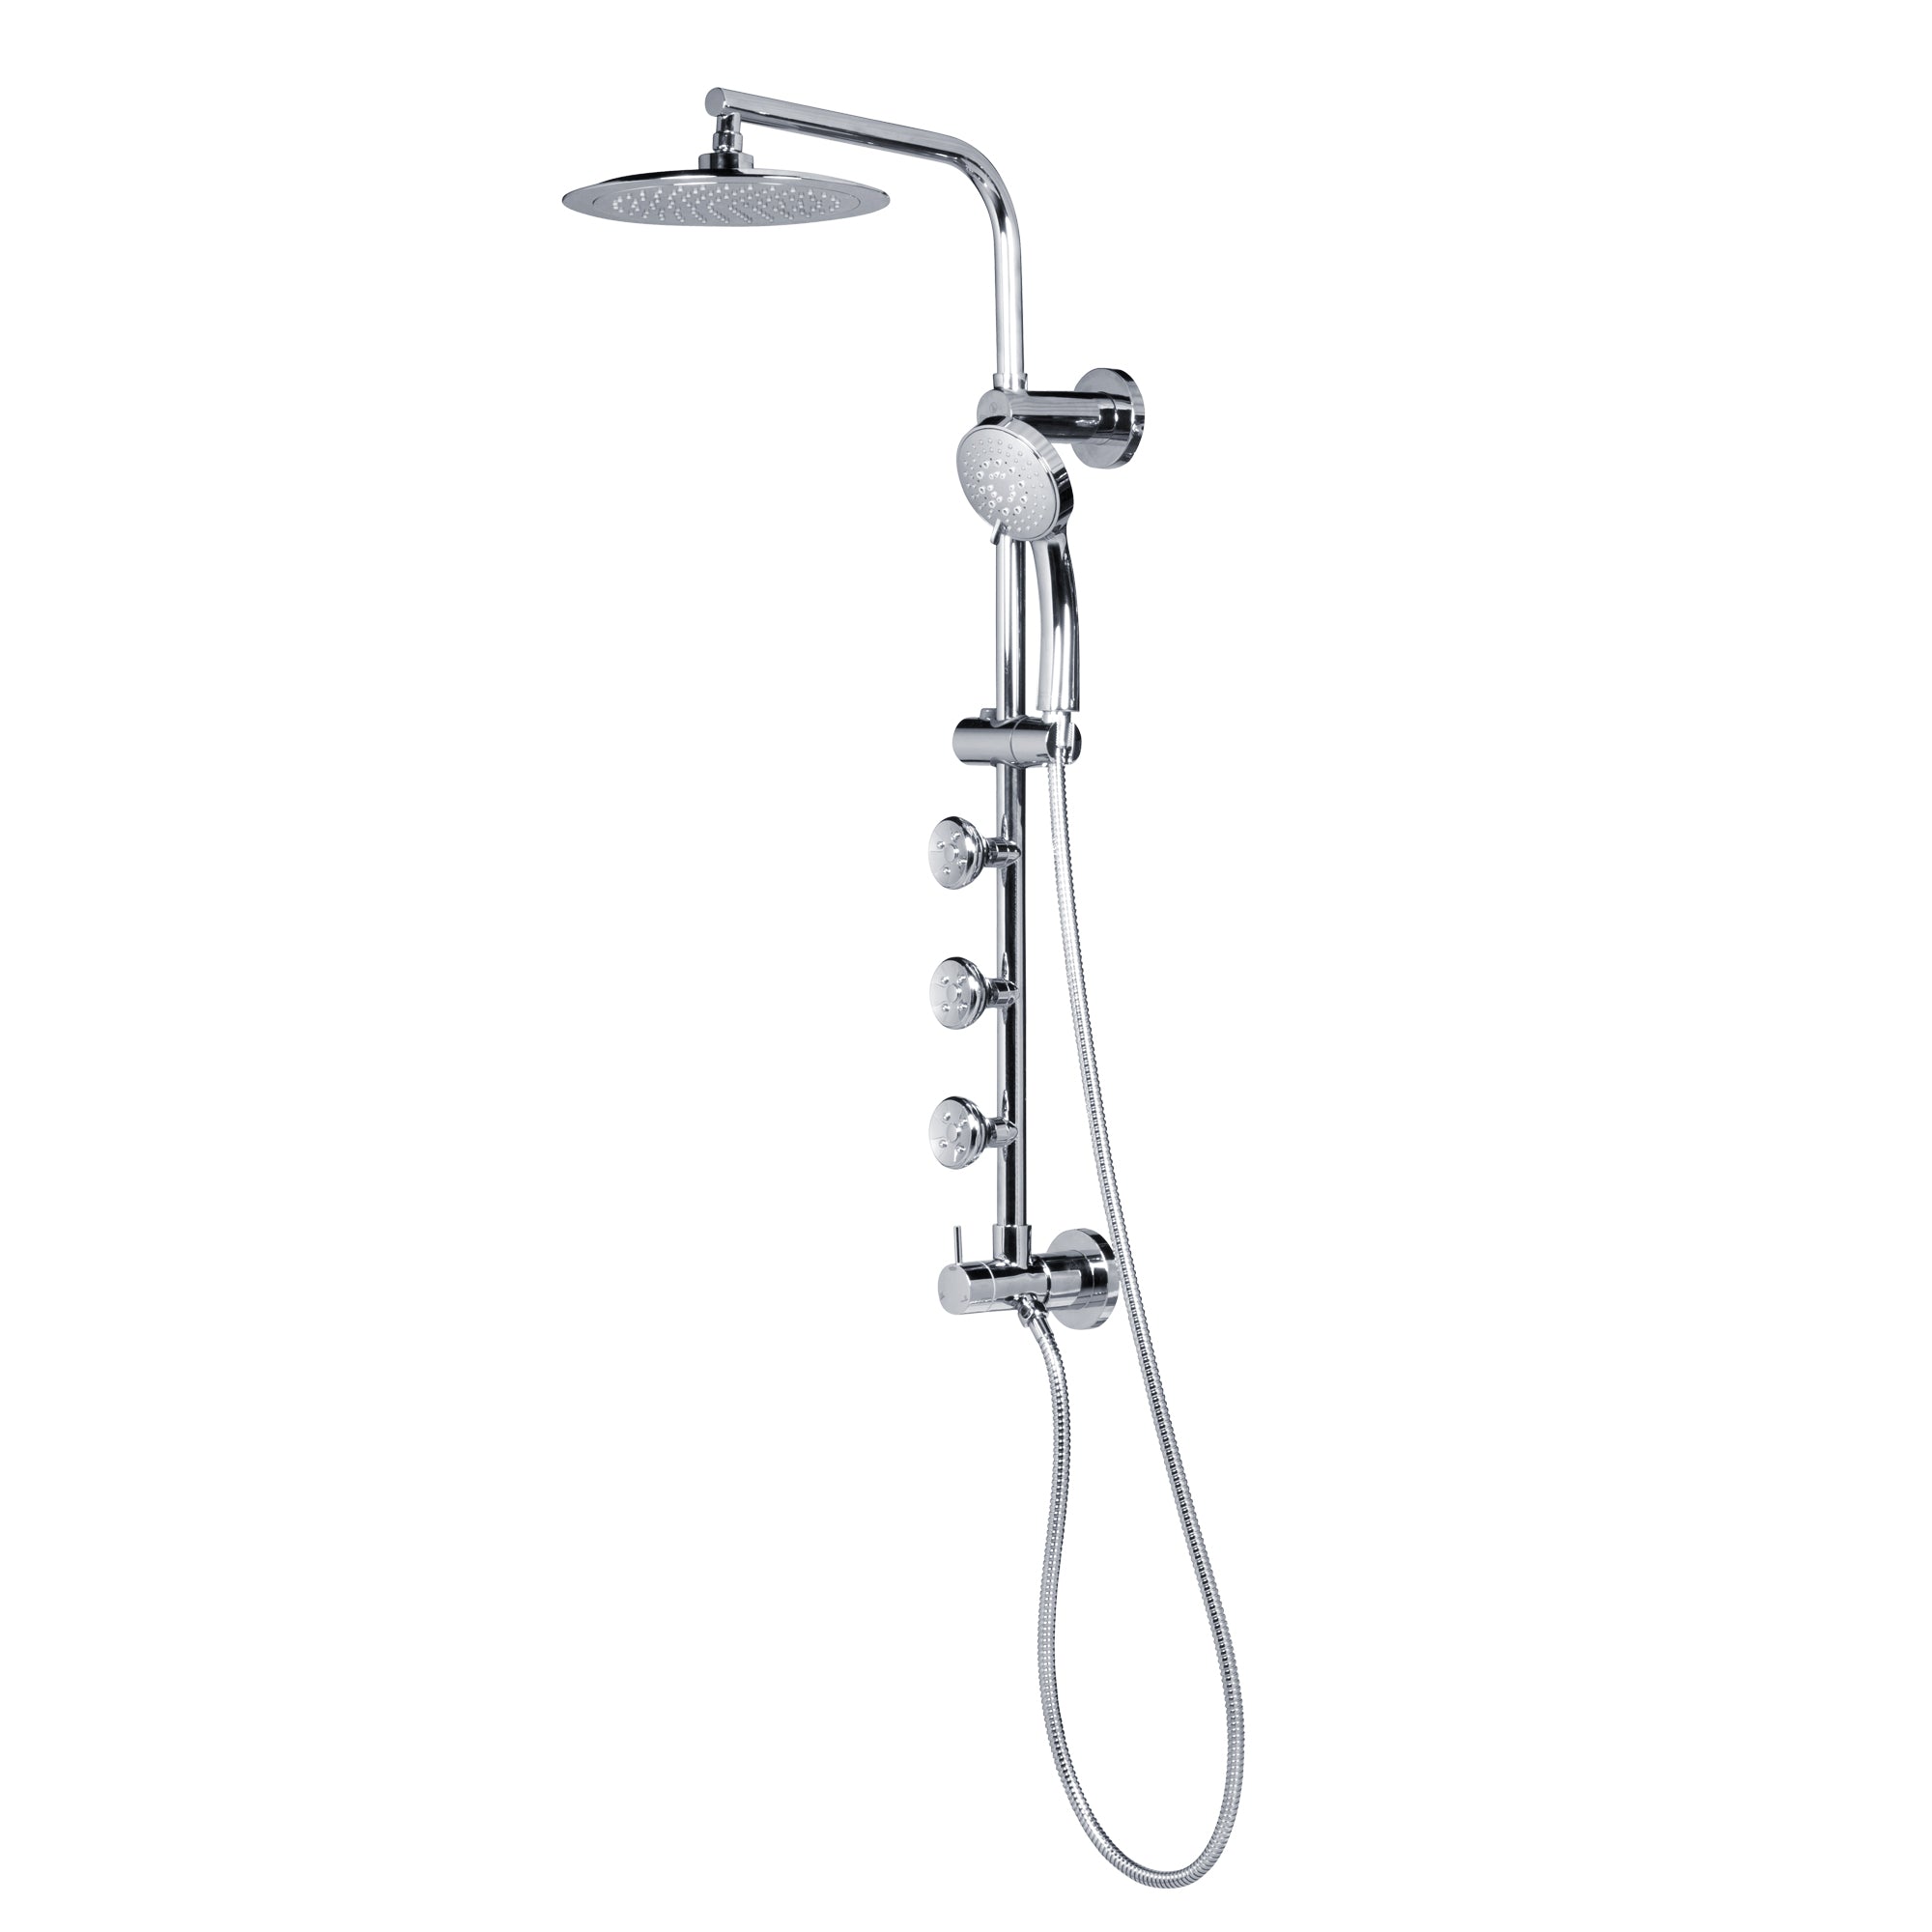 PULSE ShowerSpas Shower System - Lanai Shower System - 8" faced rain showerhead with soft tips, 3-Function faced hand shower with 59" double-interlocking stainless steel hose, brass slide bar, brass shower arm, Brass diverter and 3 PULSE body jets with top two - Polished Chrome - 1089 - Vital Hydrotherapy